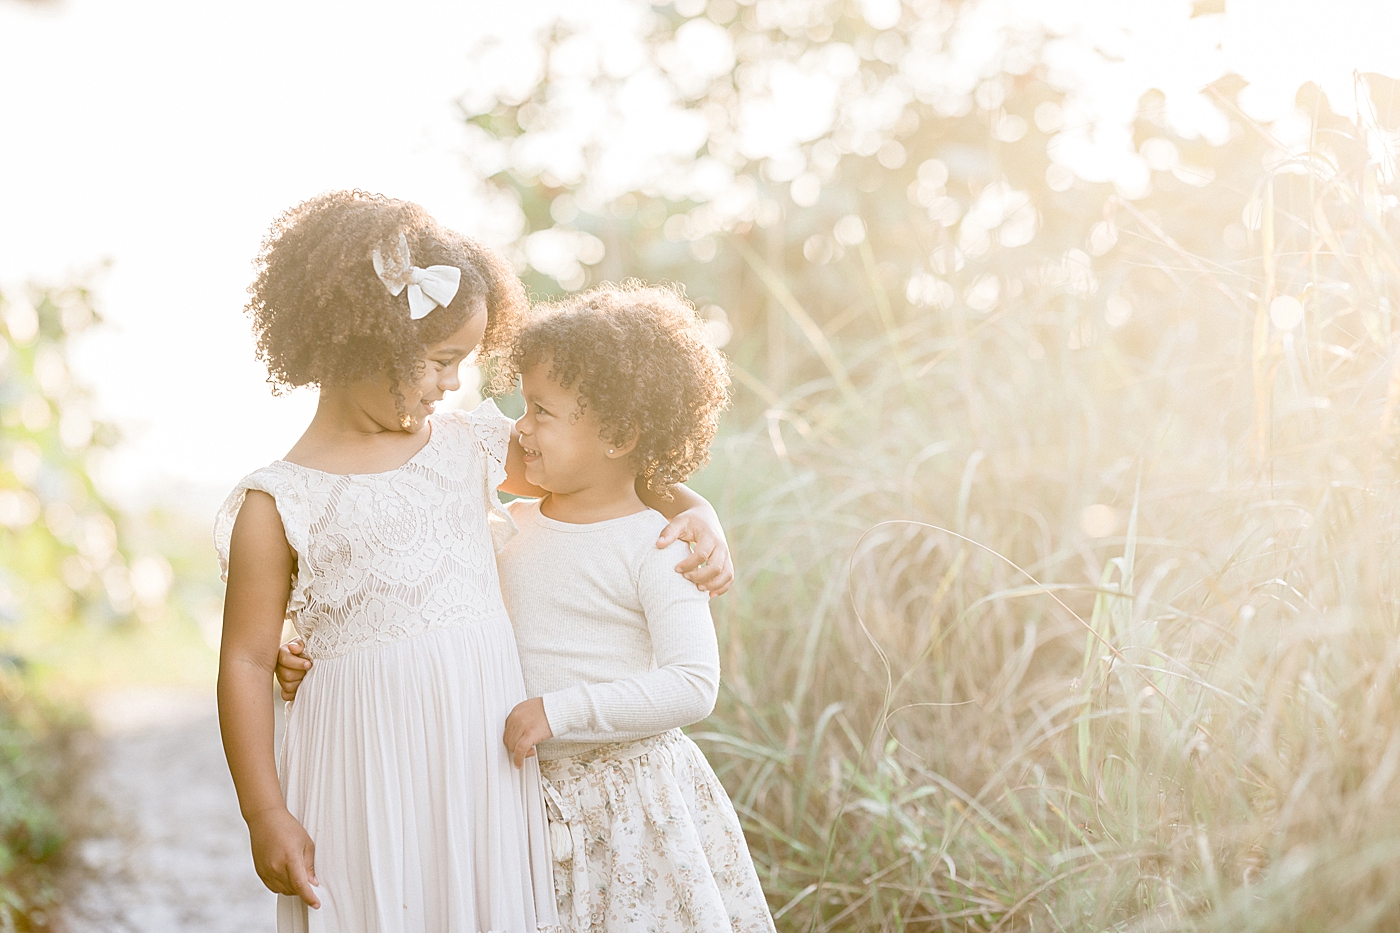 Sisters standing together with their arms around each other. Photo by Brittany Elise Photography.